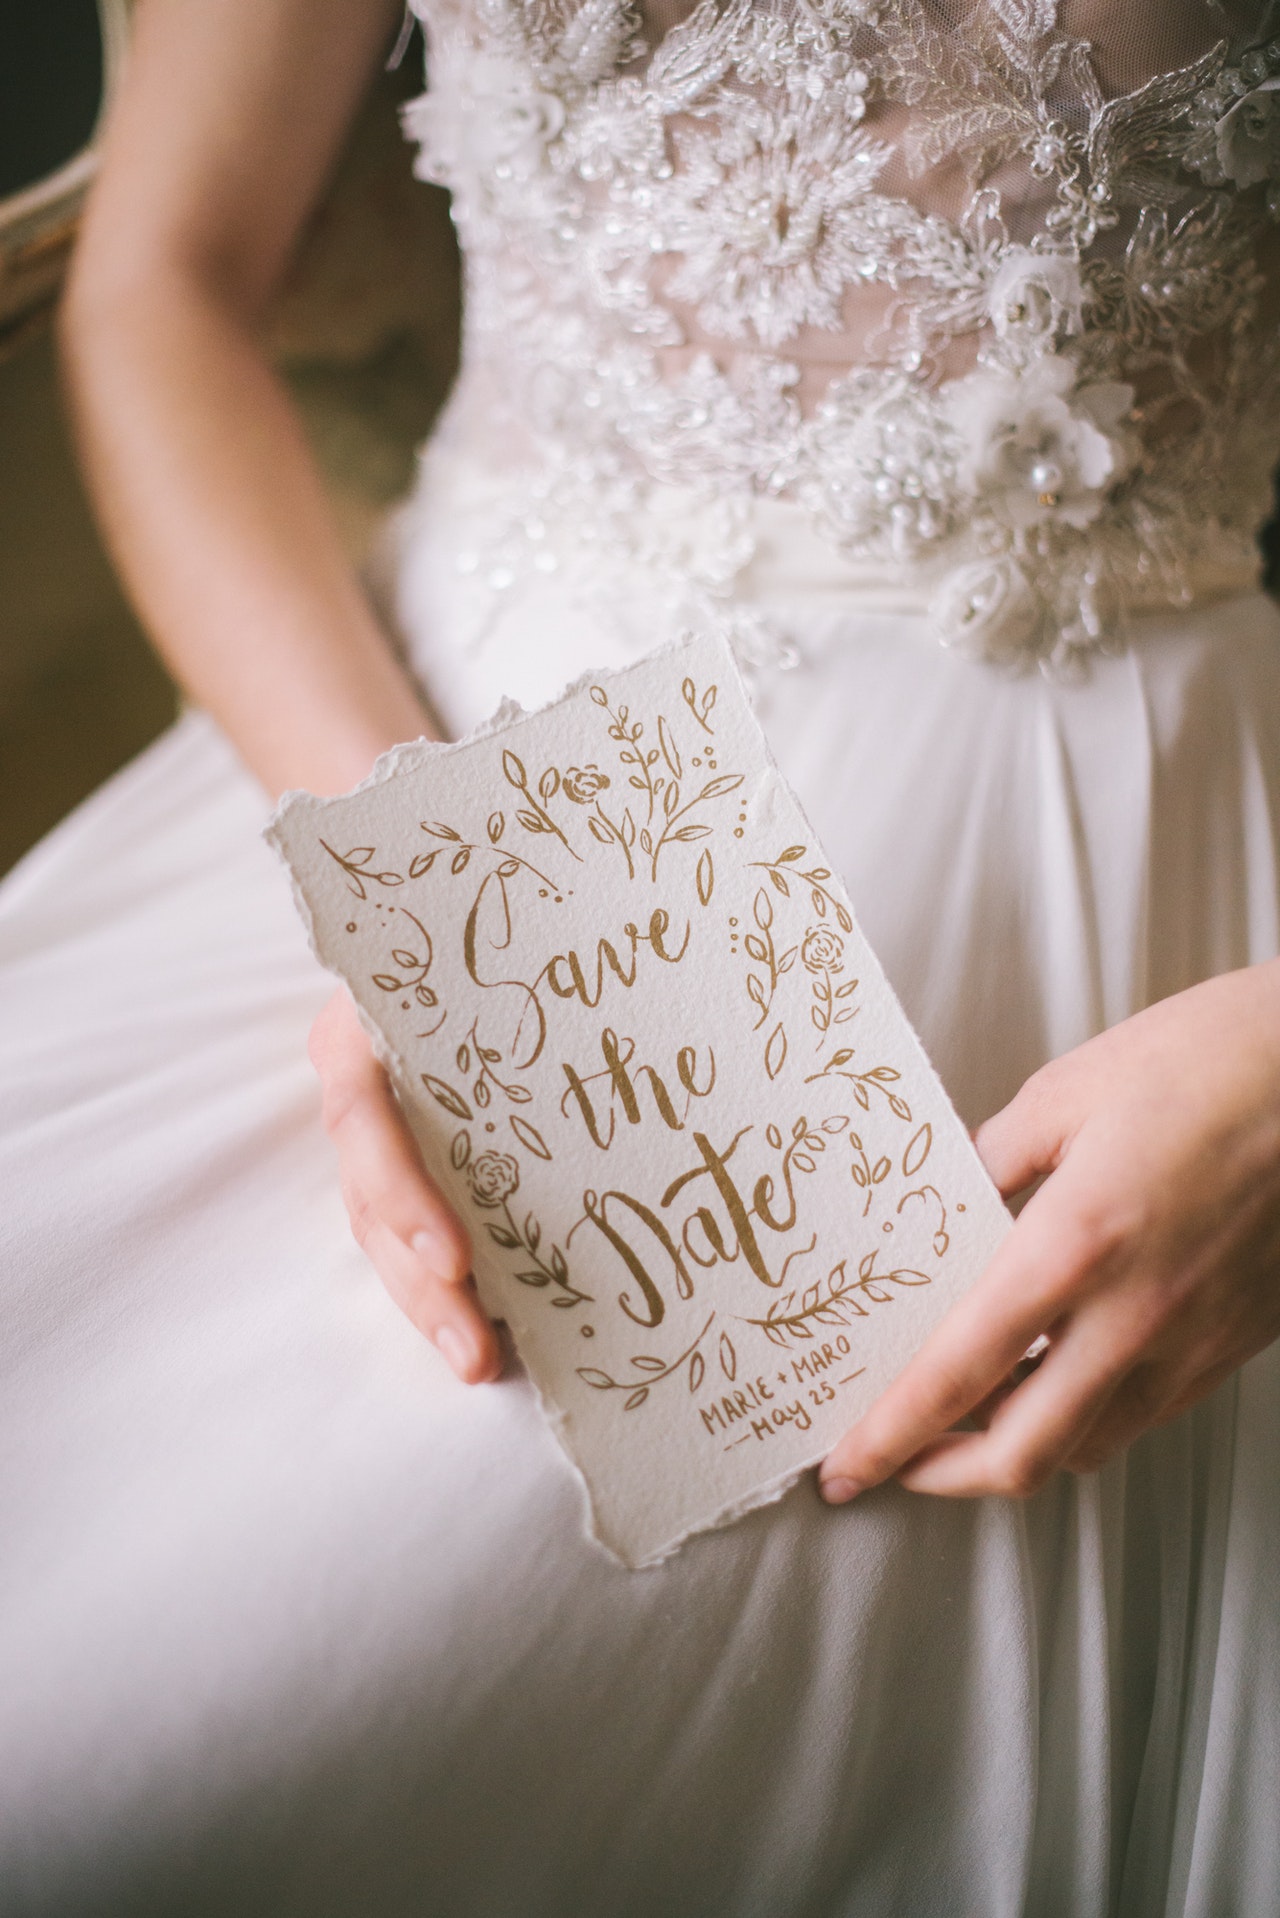 save the date held by bride